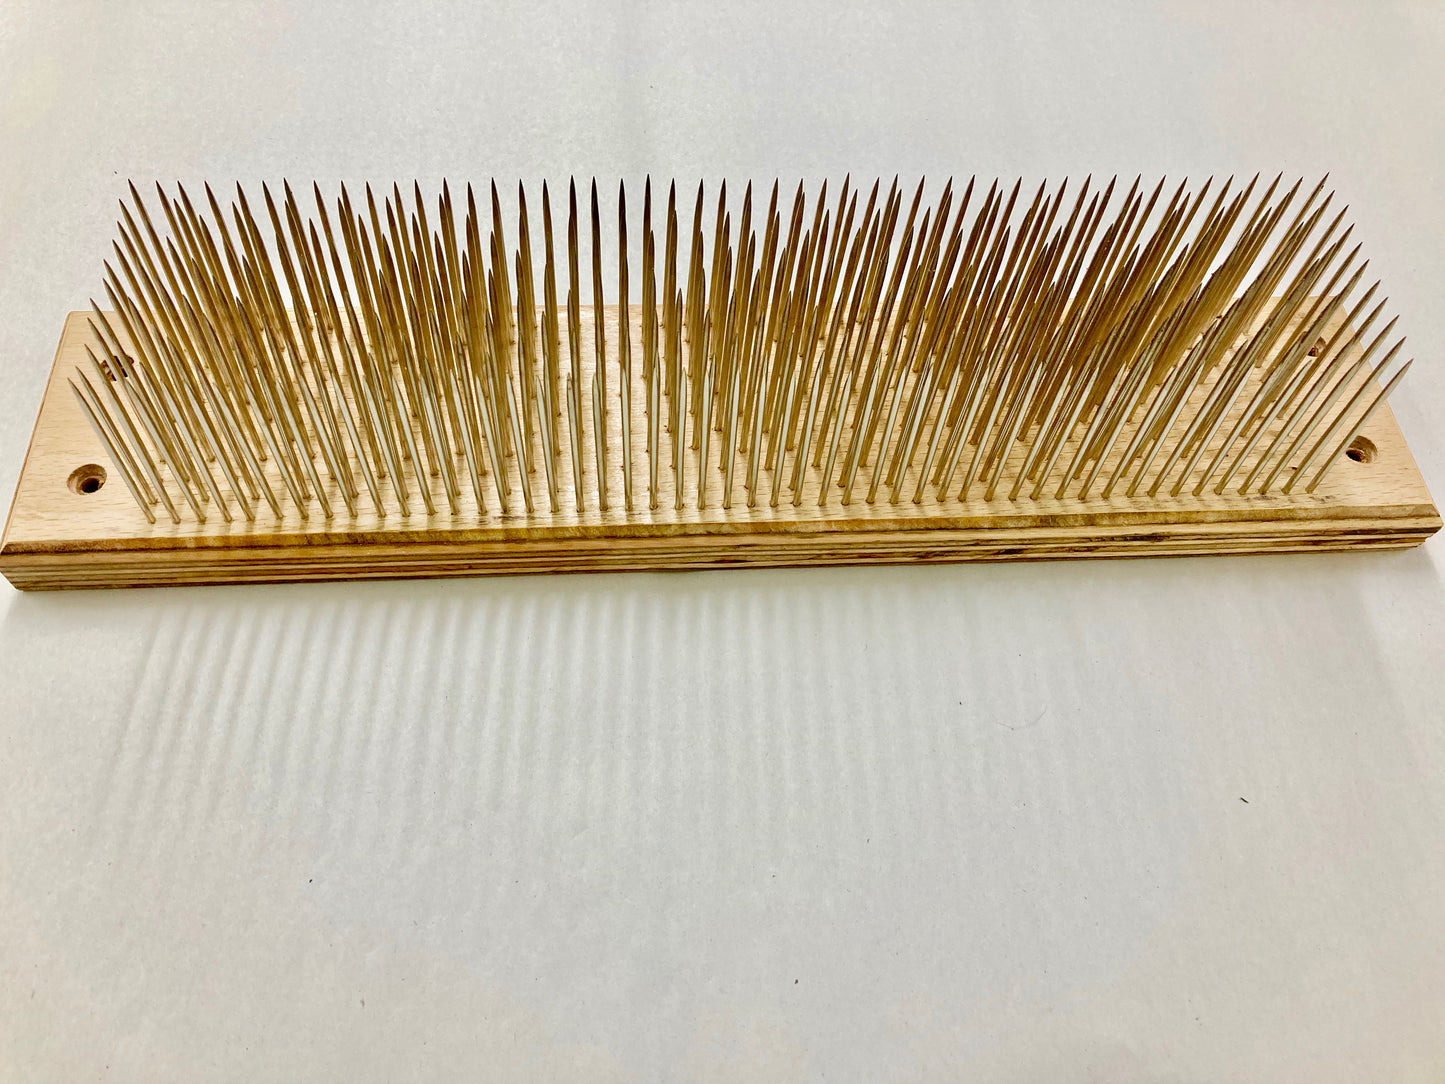 497 - Professional Long Slim Mixing/Holding Hair Hackle - Large Size - Stainless Steel Pins